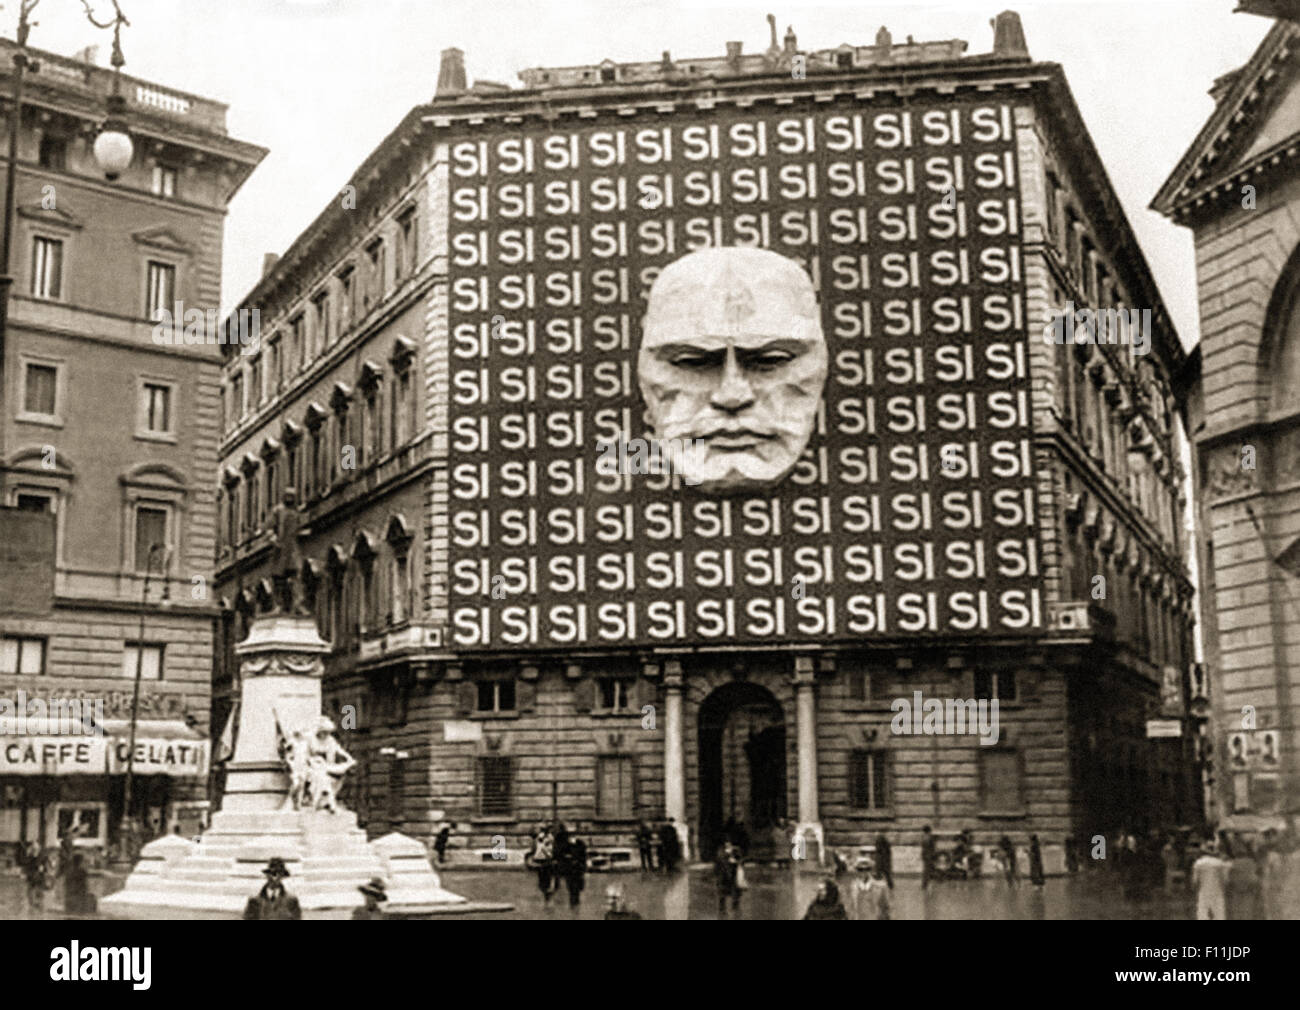 Partito Nazionale Fascista (PNF), National Fascist Party headquarters at the Palazzo Braschi, Rome, Rome in 1934 decorated with the giant face of Benito Mussolini (1883-1945) and the word 'Si' meaning 'Yes' is in reference to the Italian general election which took place on 26 March 1934 in the form of a referendum; voters could either approve or reject the Grand Council of the National Fascist Party, 99.84% of voters voted 'si'. The party ruled Italy from 1922 when Fascists took the power with the March on Rome, to 1943, when Mussolini was deposed by the Grand Council of Fascism itself. Stock Photo